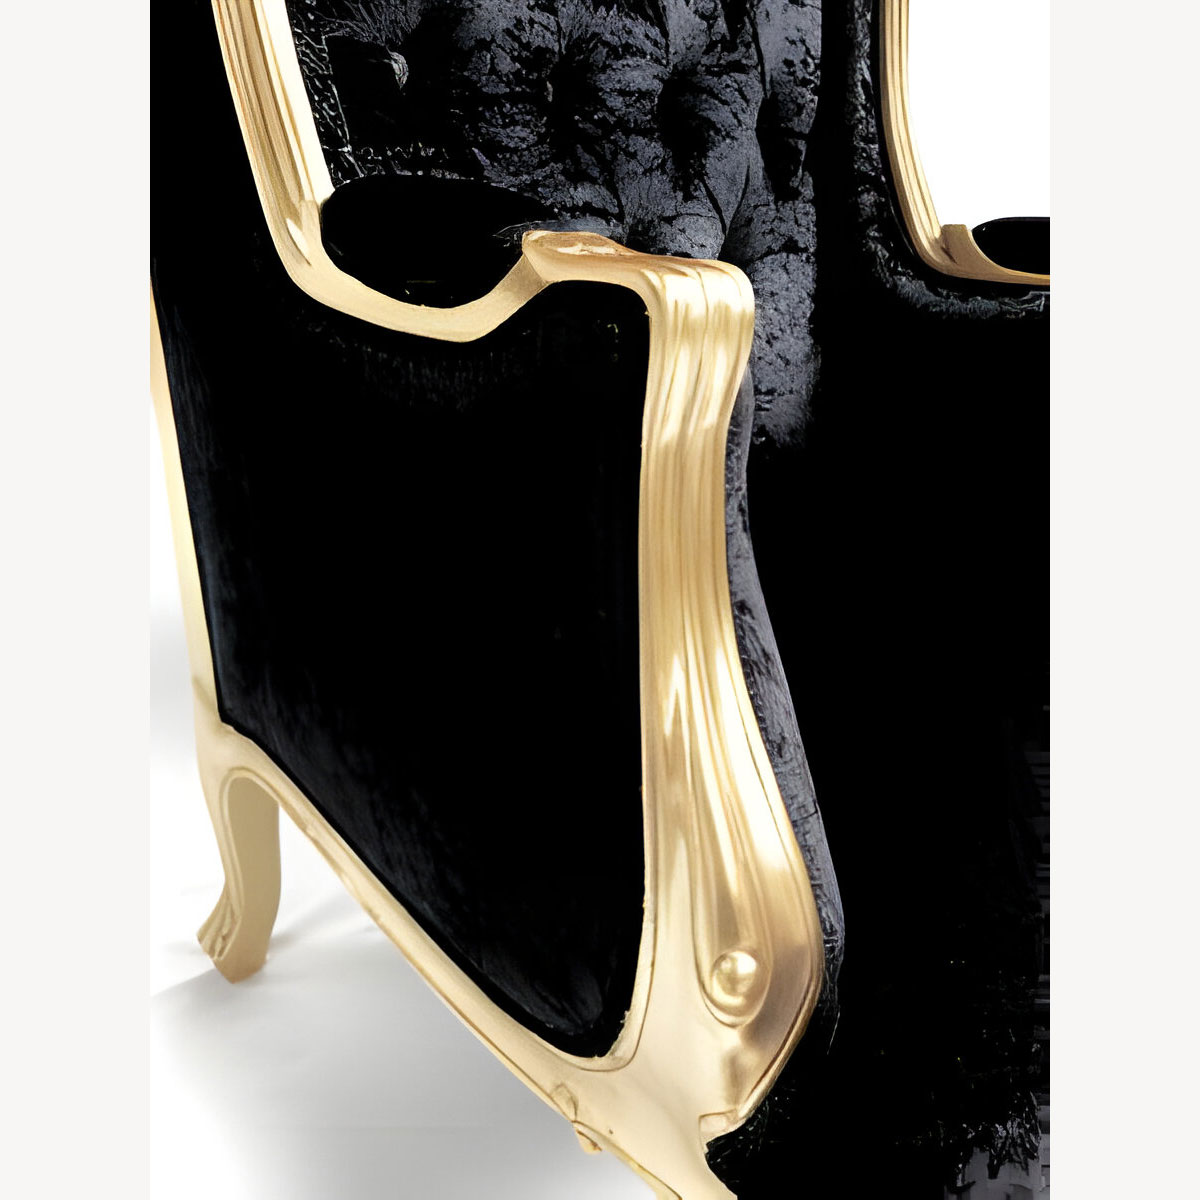 Gold Ornate High Back Porters Arm Chair In Black Crushed Velvet With Crystals 2 - Hampshire Barn Interiors - Gold Ornate High Back Porters Arm Chair In Black Crushed Velvet With Crystals -